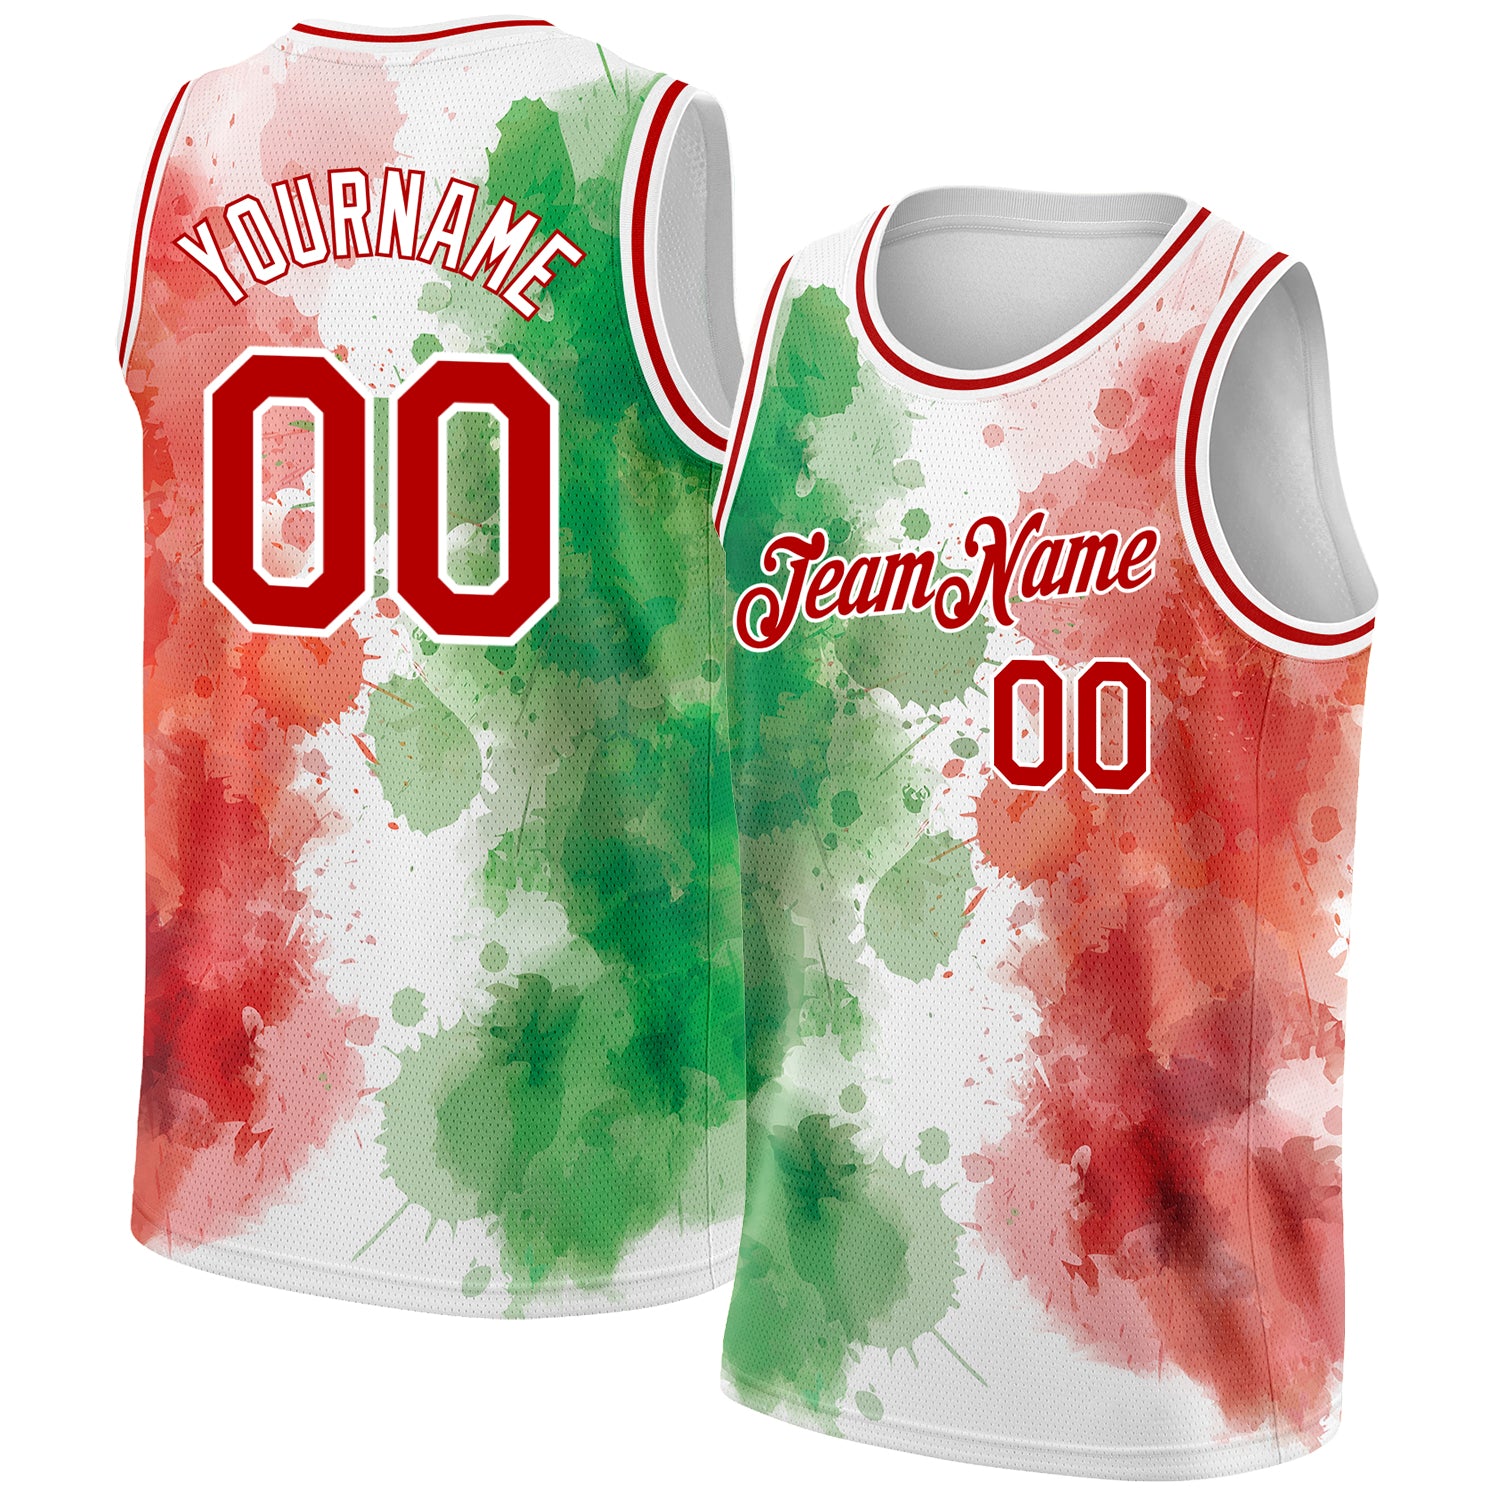 FANSIDEA Custom Basketball Jersey Kelly Green Red-White 3D Mexico Watercolored Splashes Grunge Design Authentic Men's Size:L